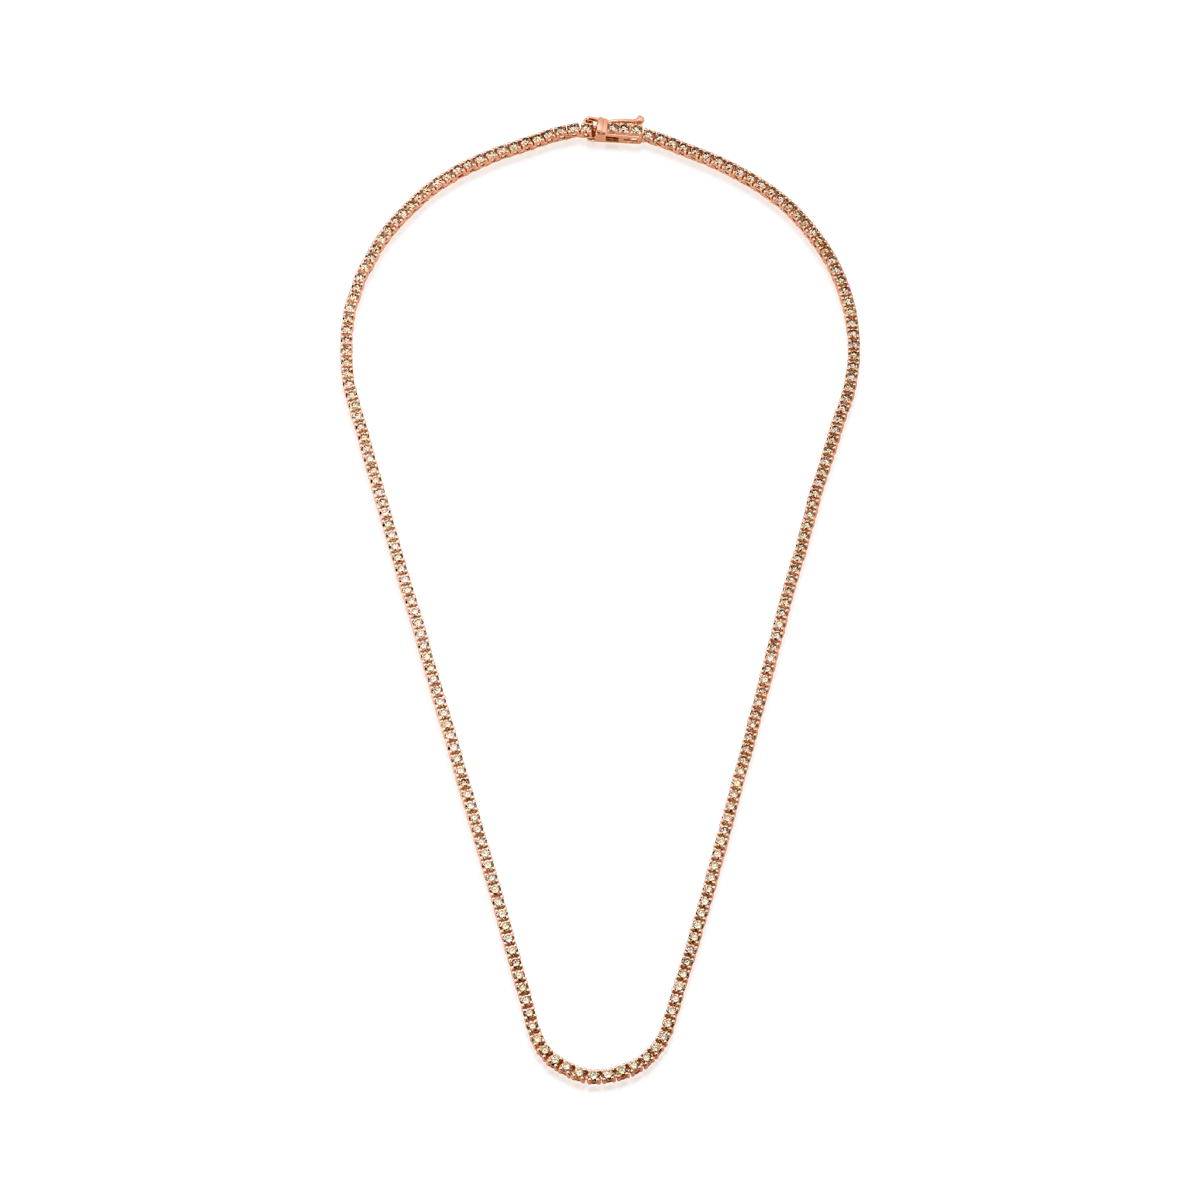 18K rose gold necklace with 4.52ct brown diamonds